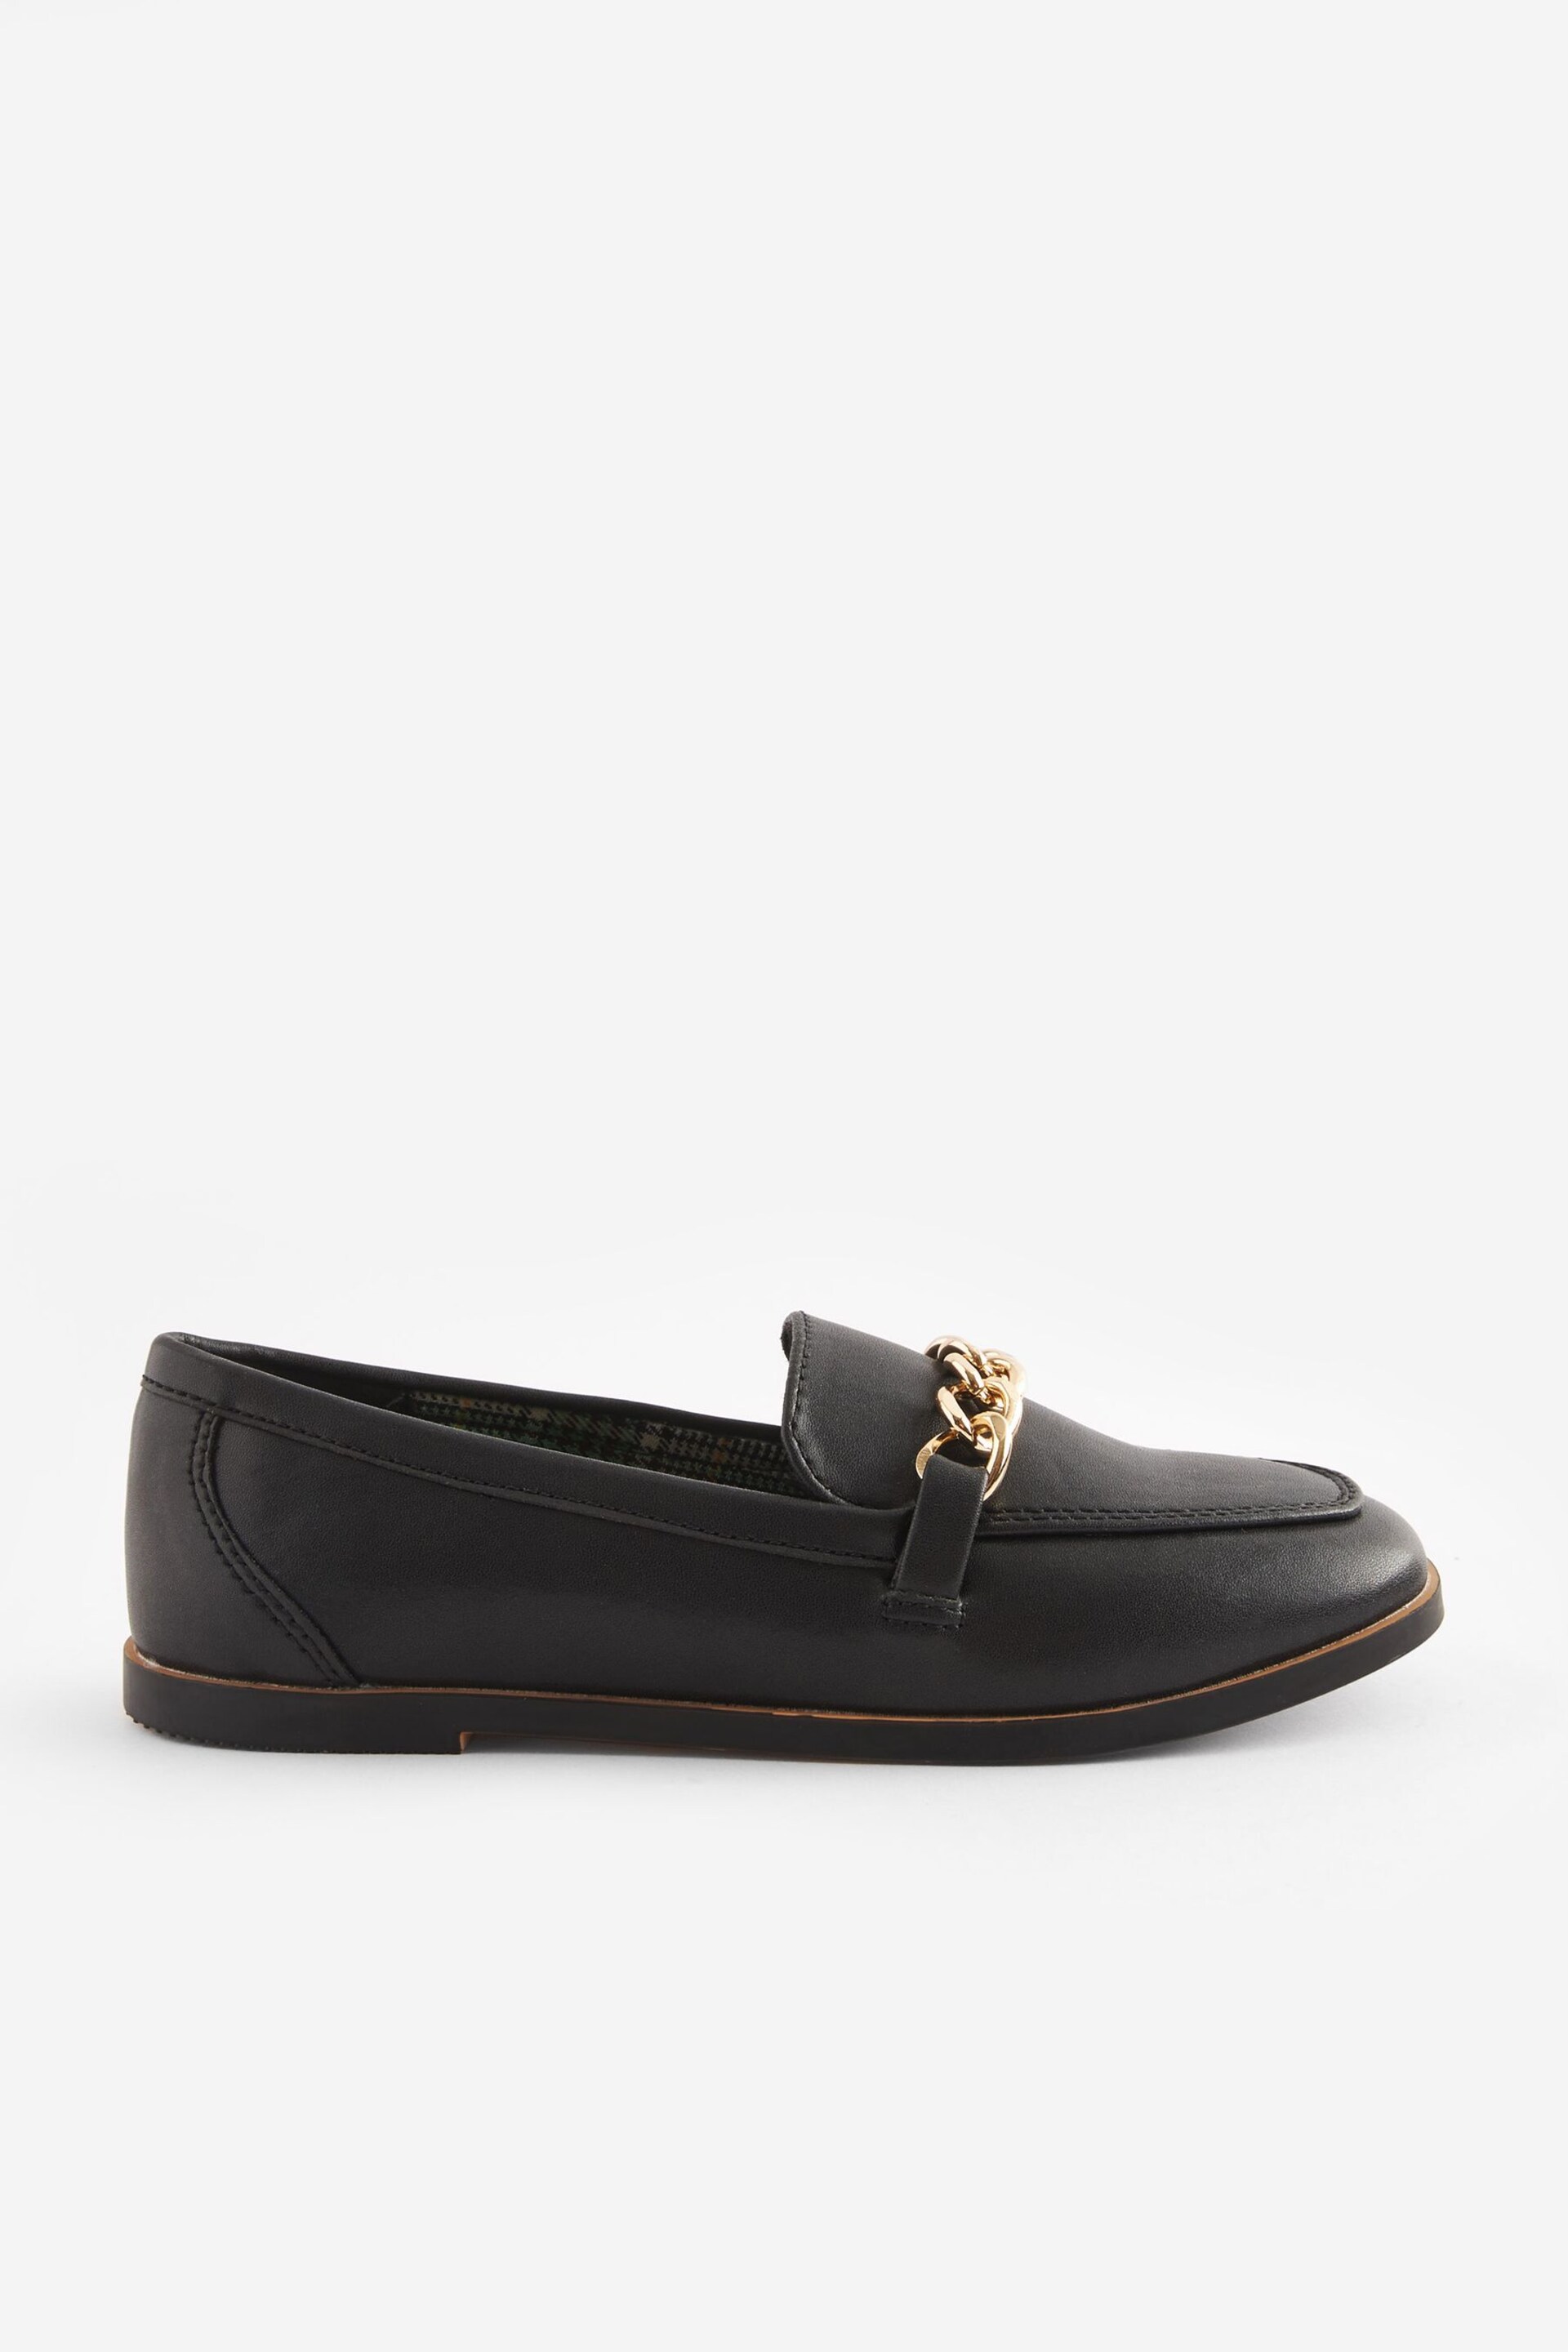 Black Chain Loafers - Image 2 of 5